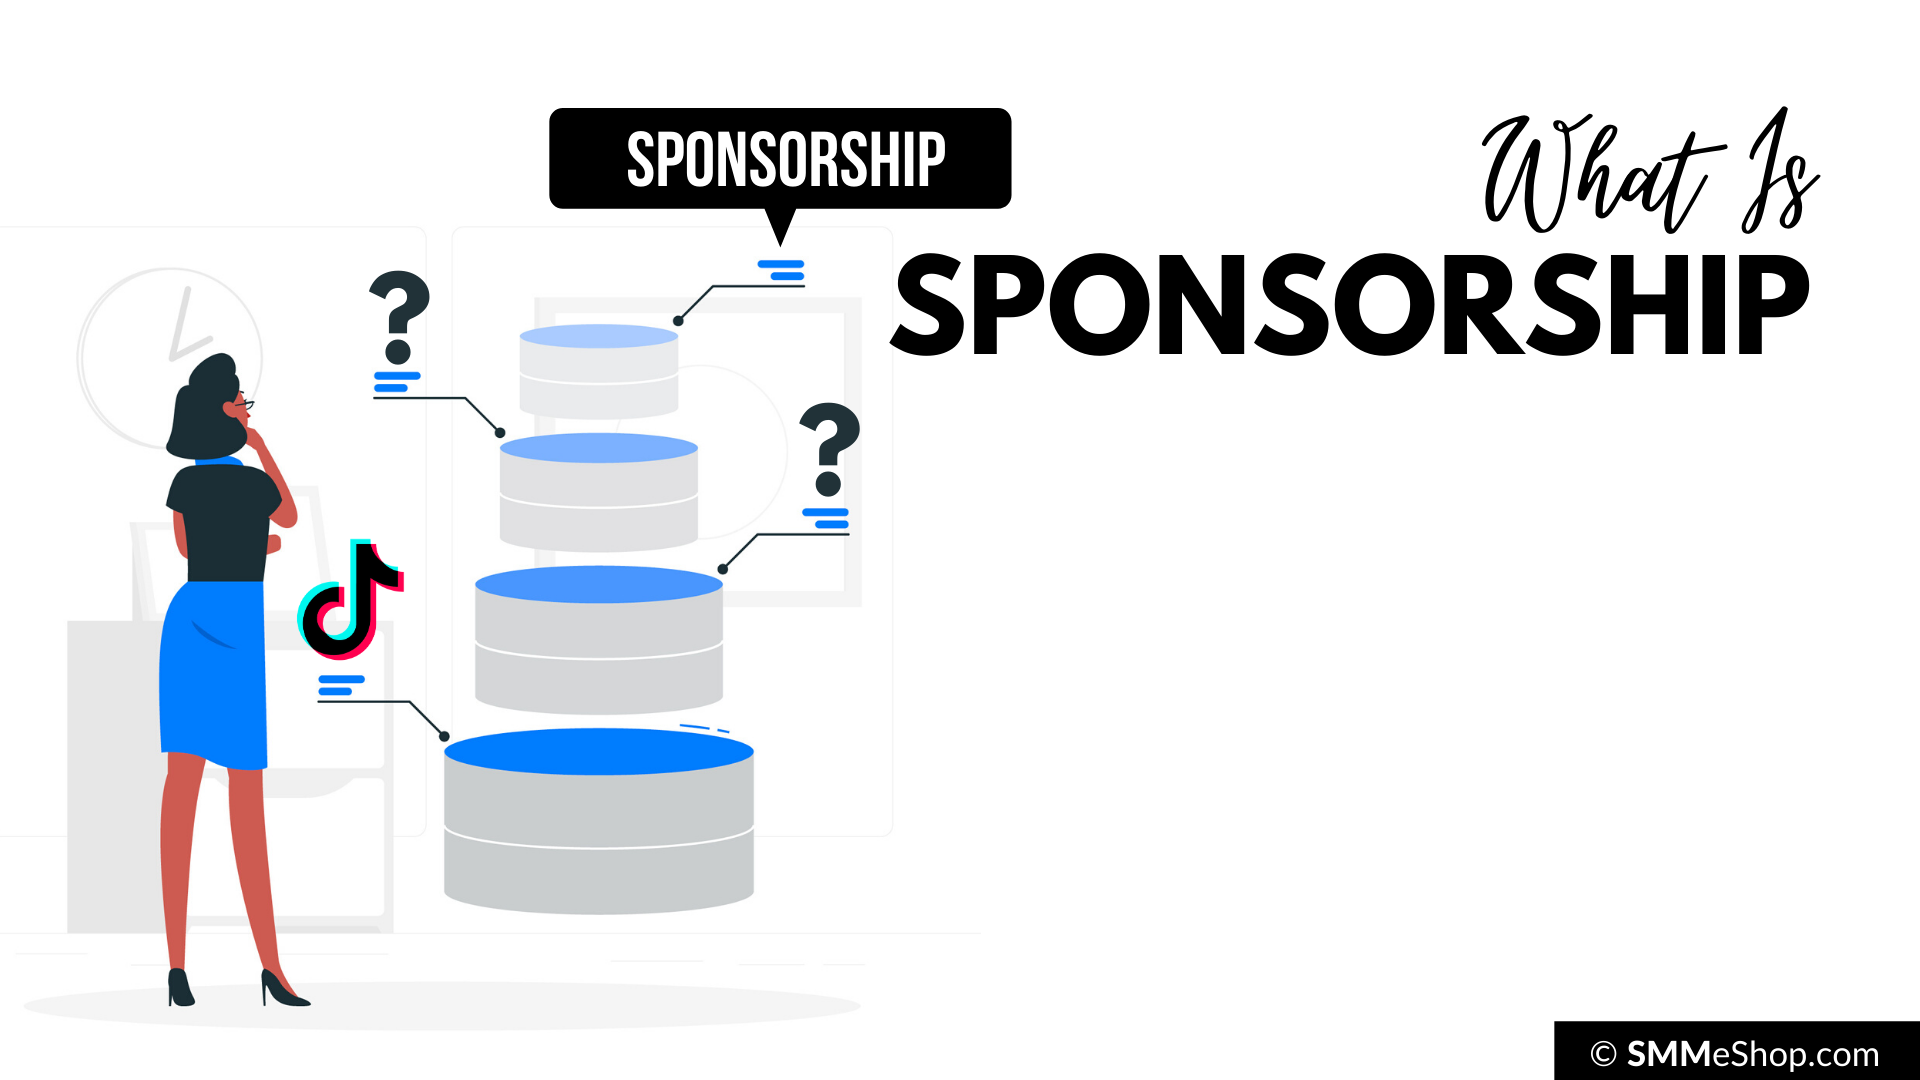 What Is Sponsorship?